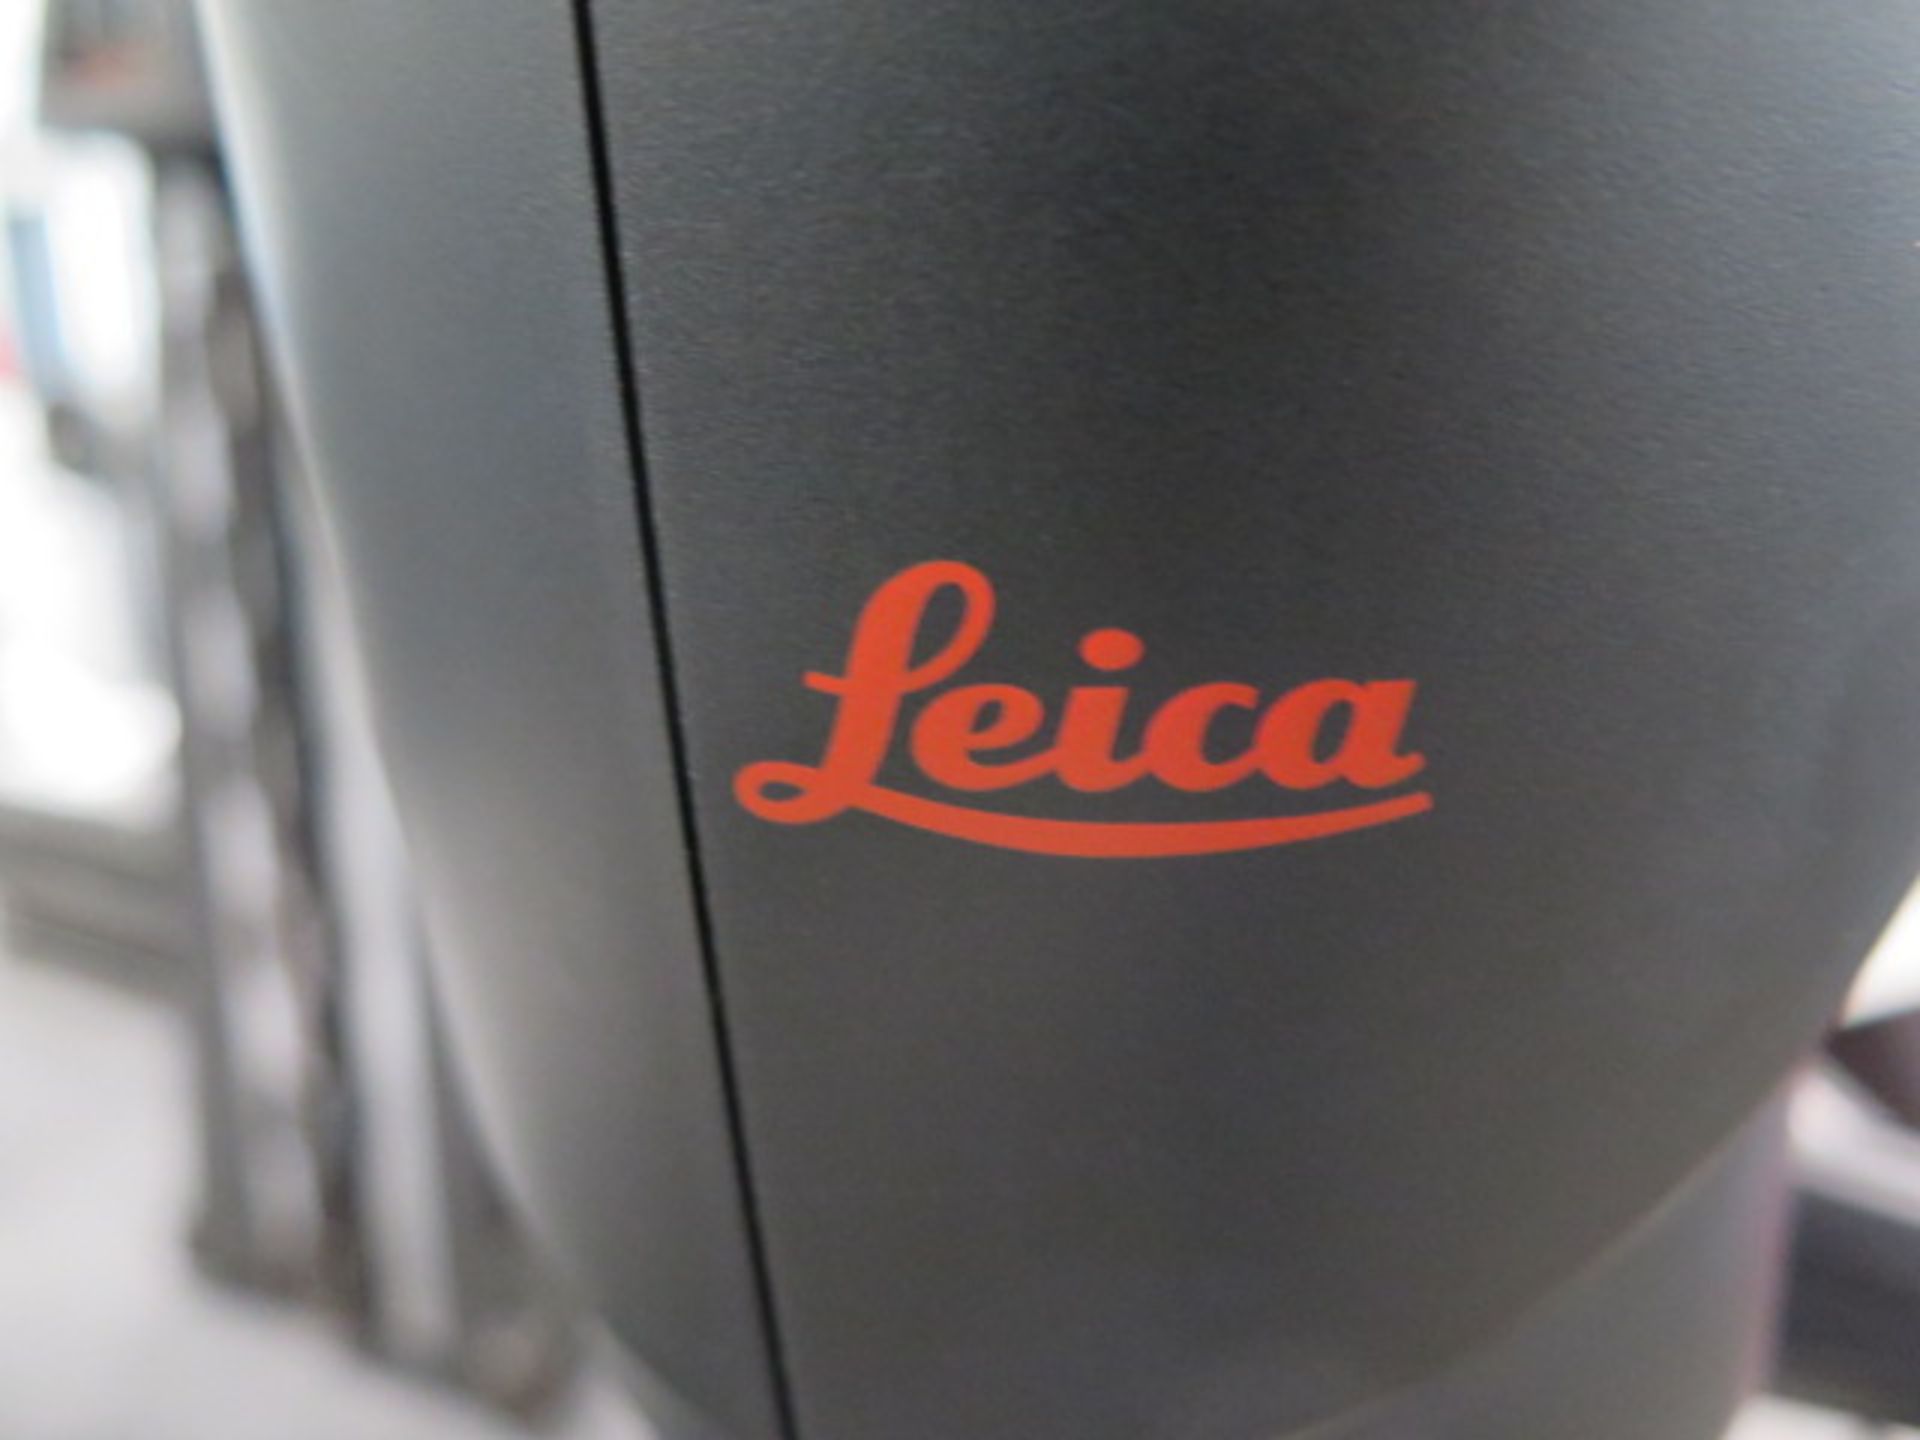 Leica “Sterozoom” Stereo Microscope s/n 1818190006 w/ Fiber Optic Light Source (SOLD AS-IS - NO - Image 7 of 8